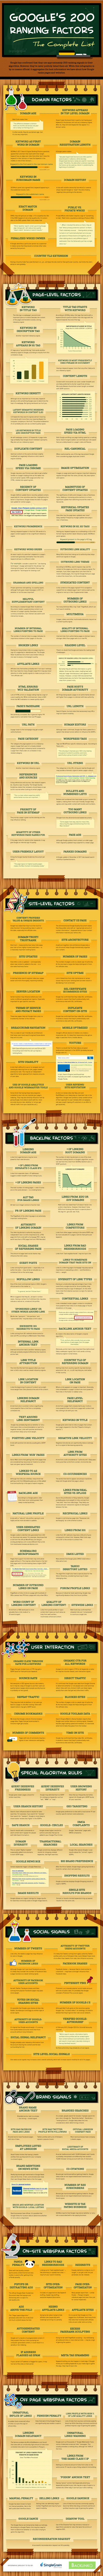 pagerank infographic